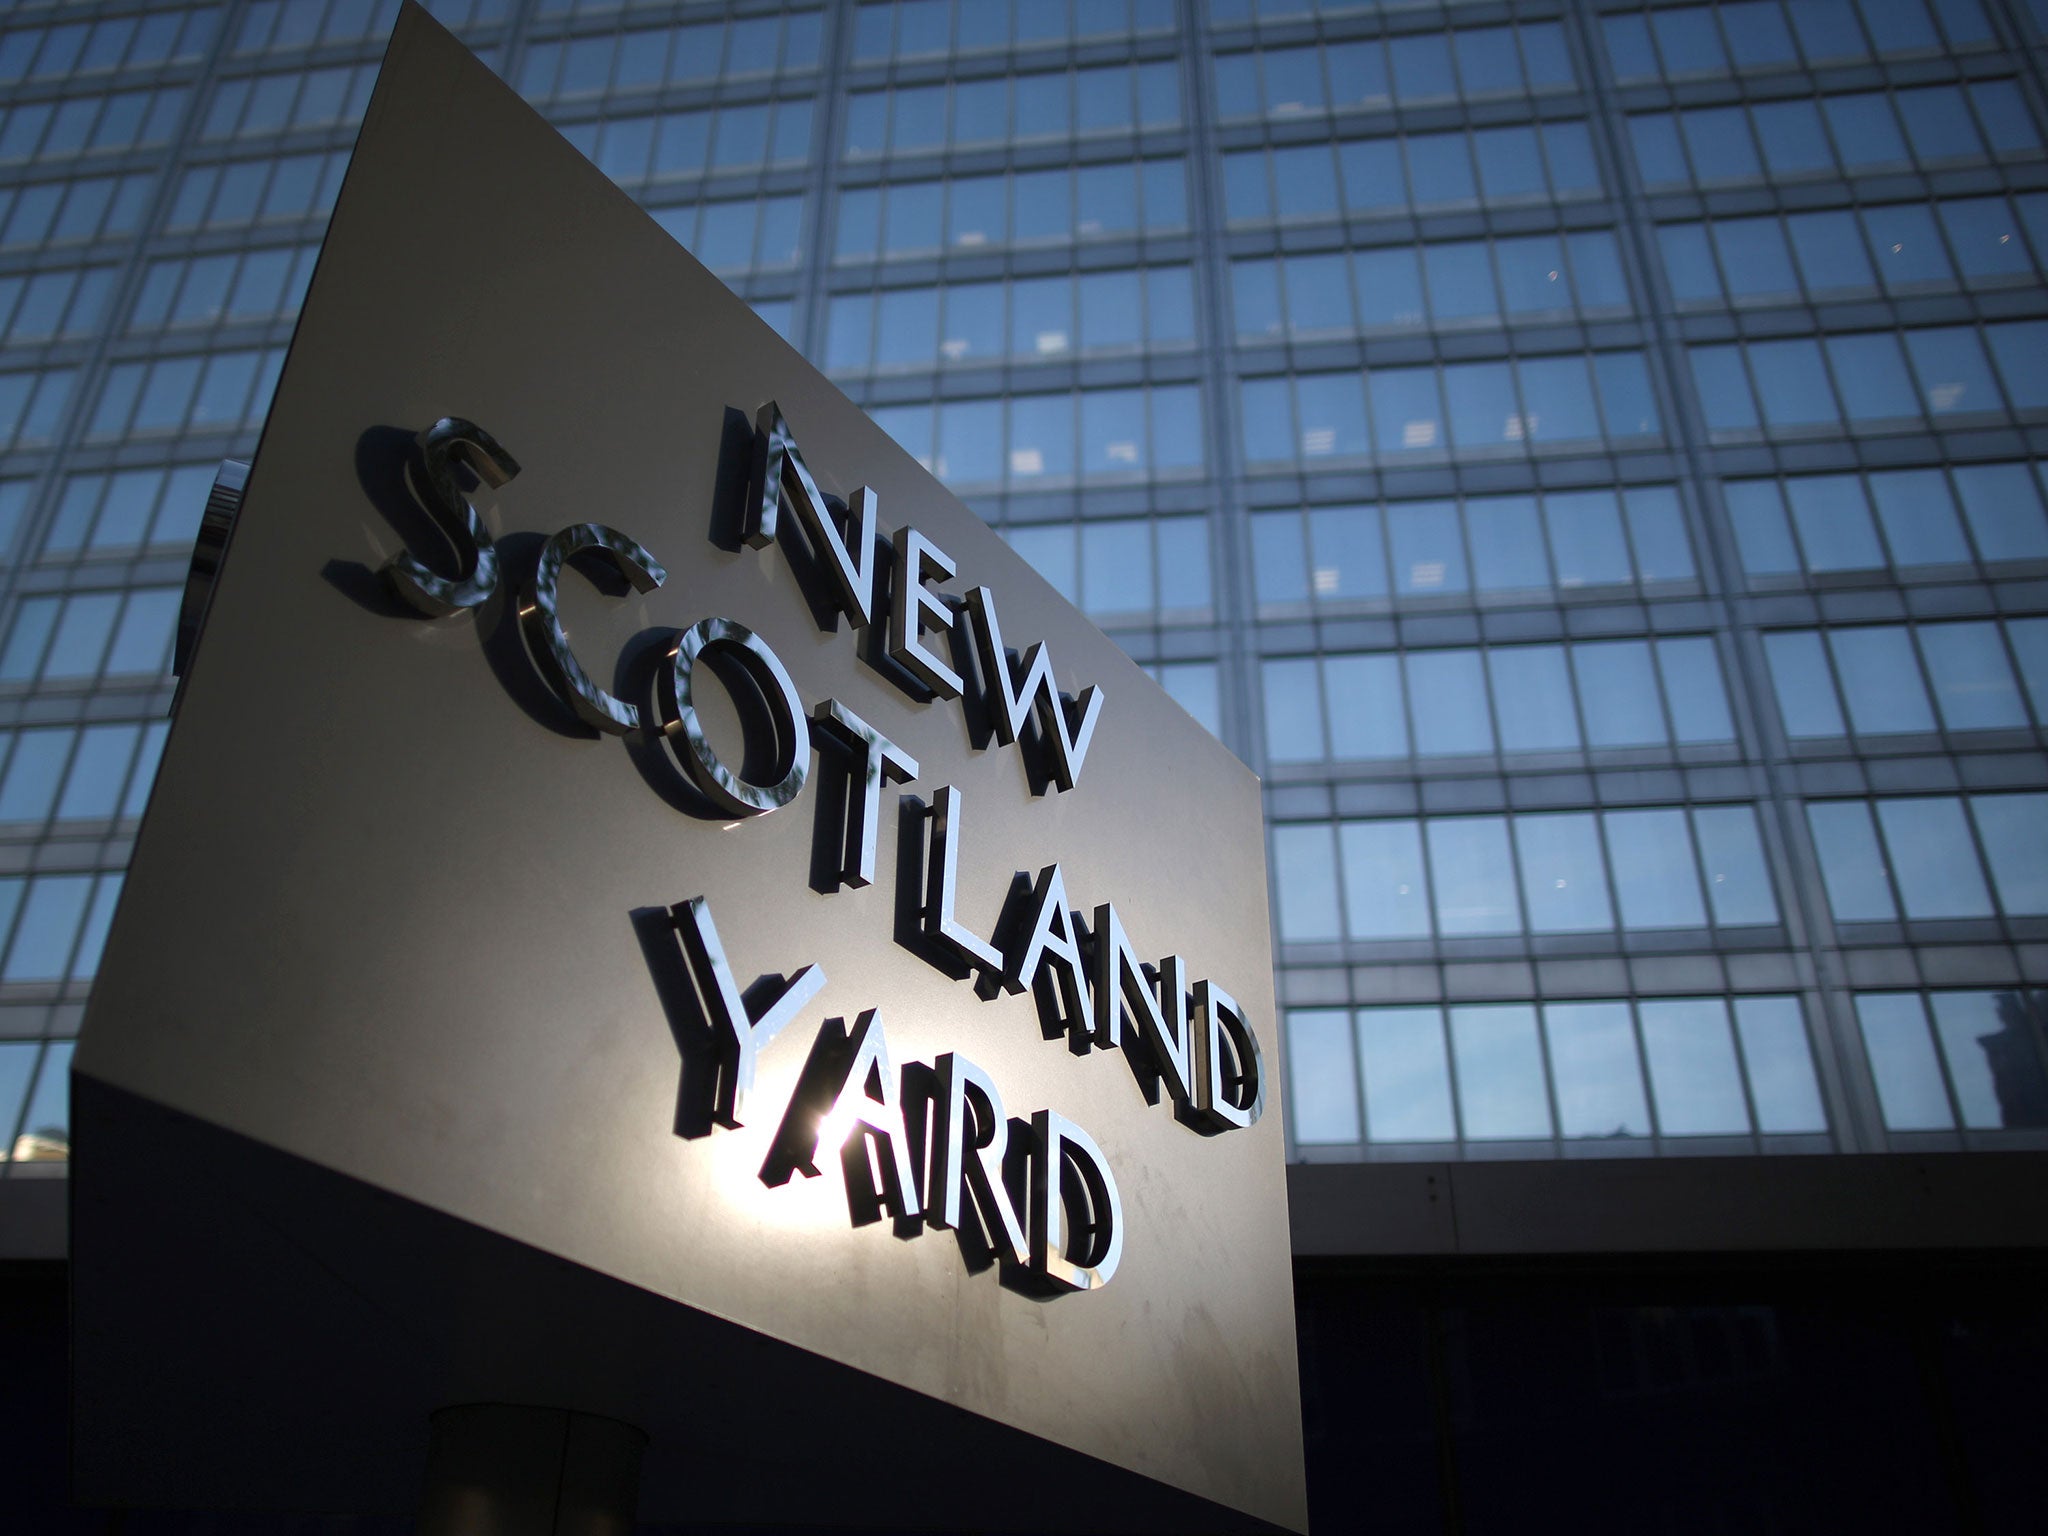 Detectives at Scotland Yard have been asked to examine whether the firm may have acted illegally in fulfilling the terms of a £70m contract it won last August to service the Cuban base, which currently houses 127 inmates not charged with any offence